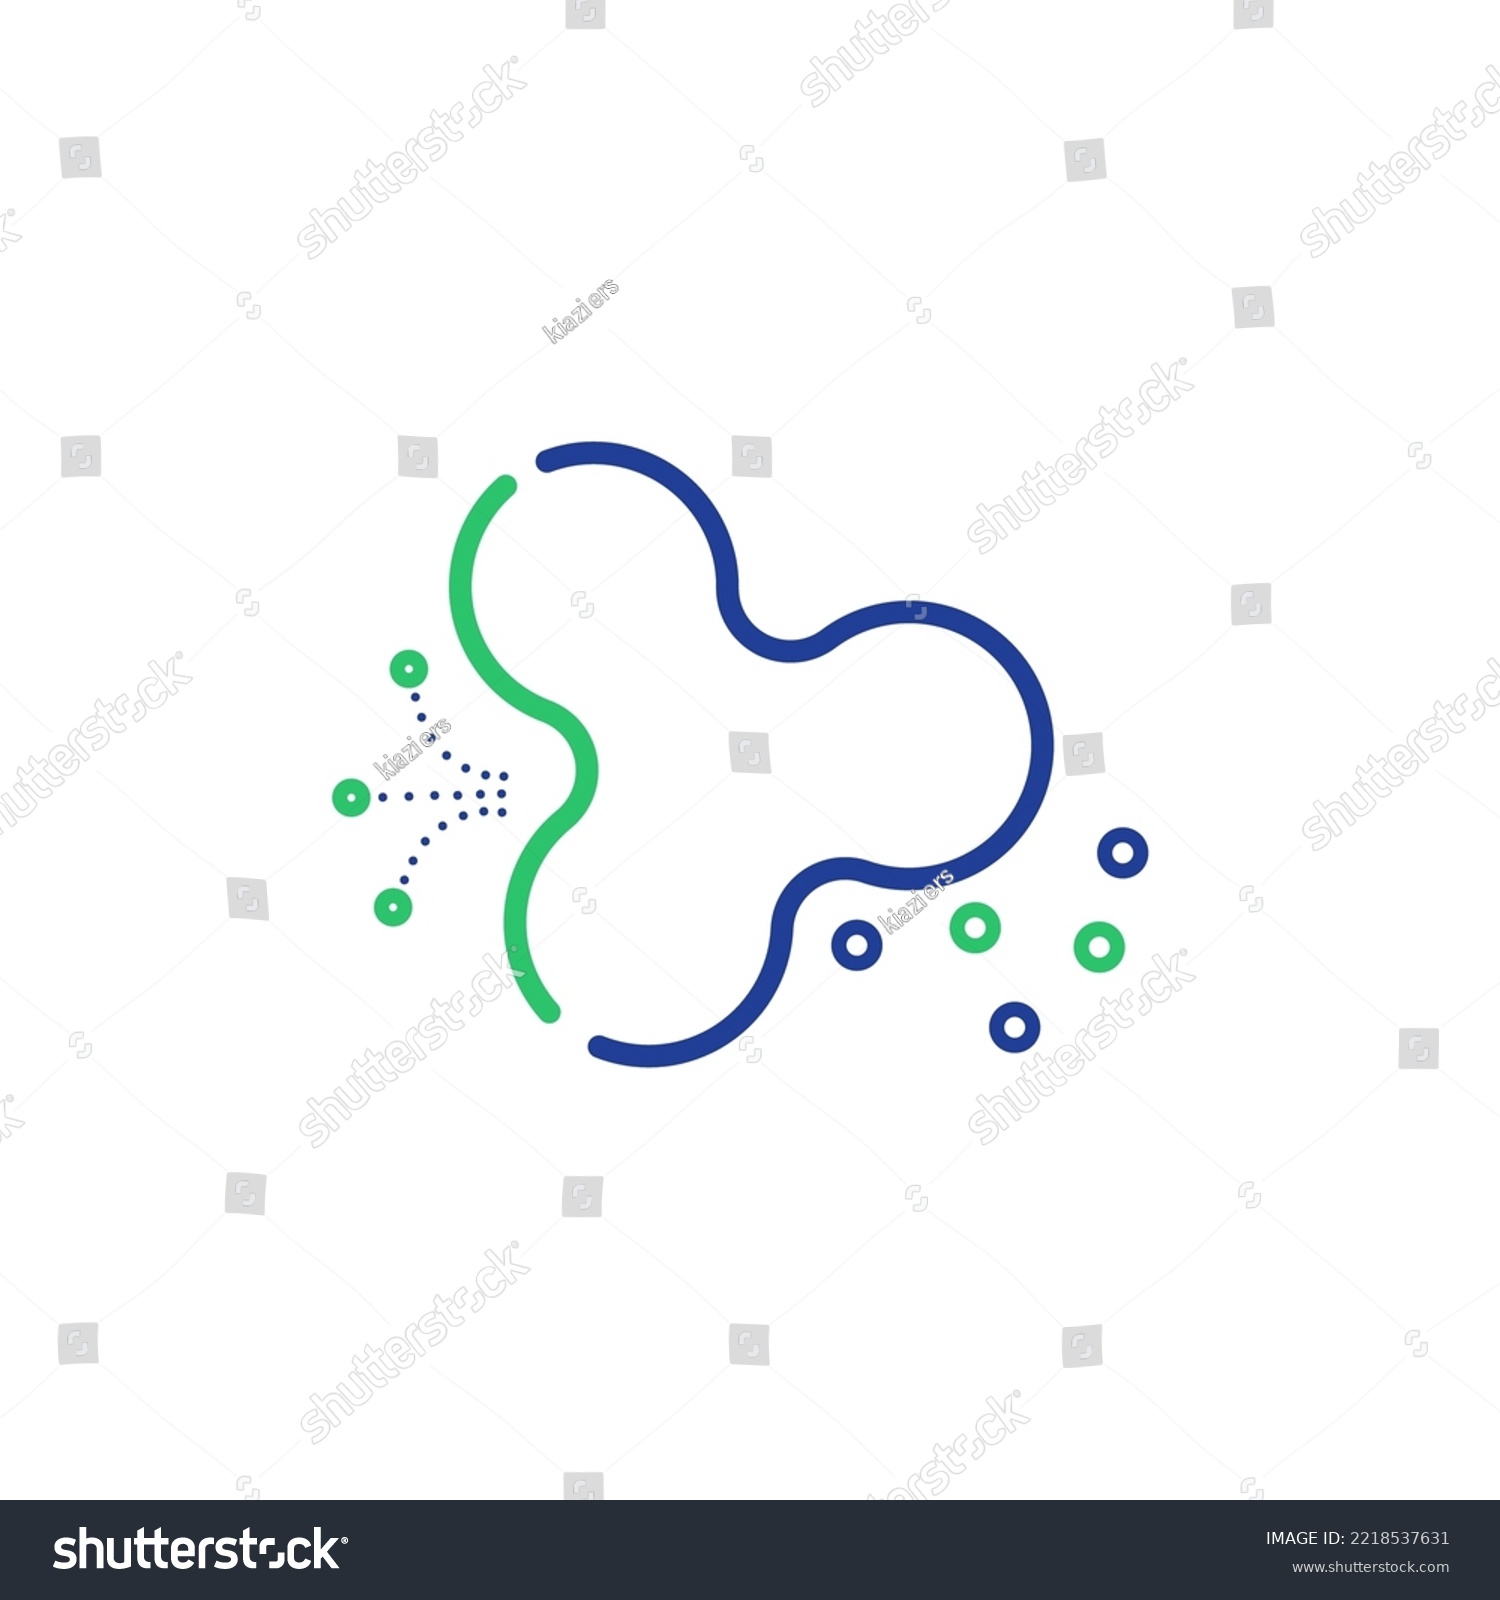 SVG of cryptocurrency ripple coin icon logo with white background, illustrations for crypto, finance, virtual, future, decentralized, good use for your design or icon apps and web svg